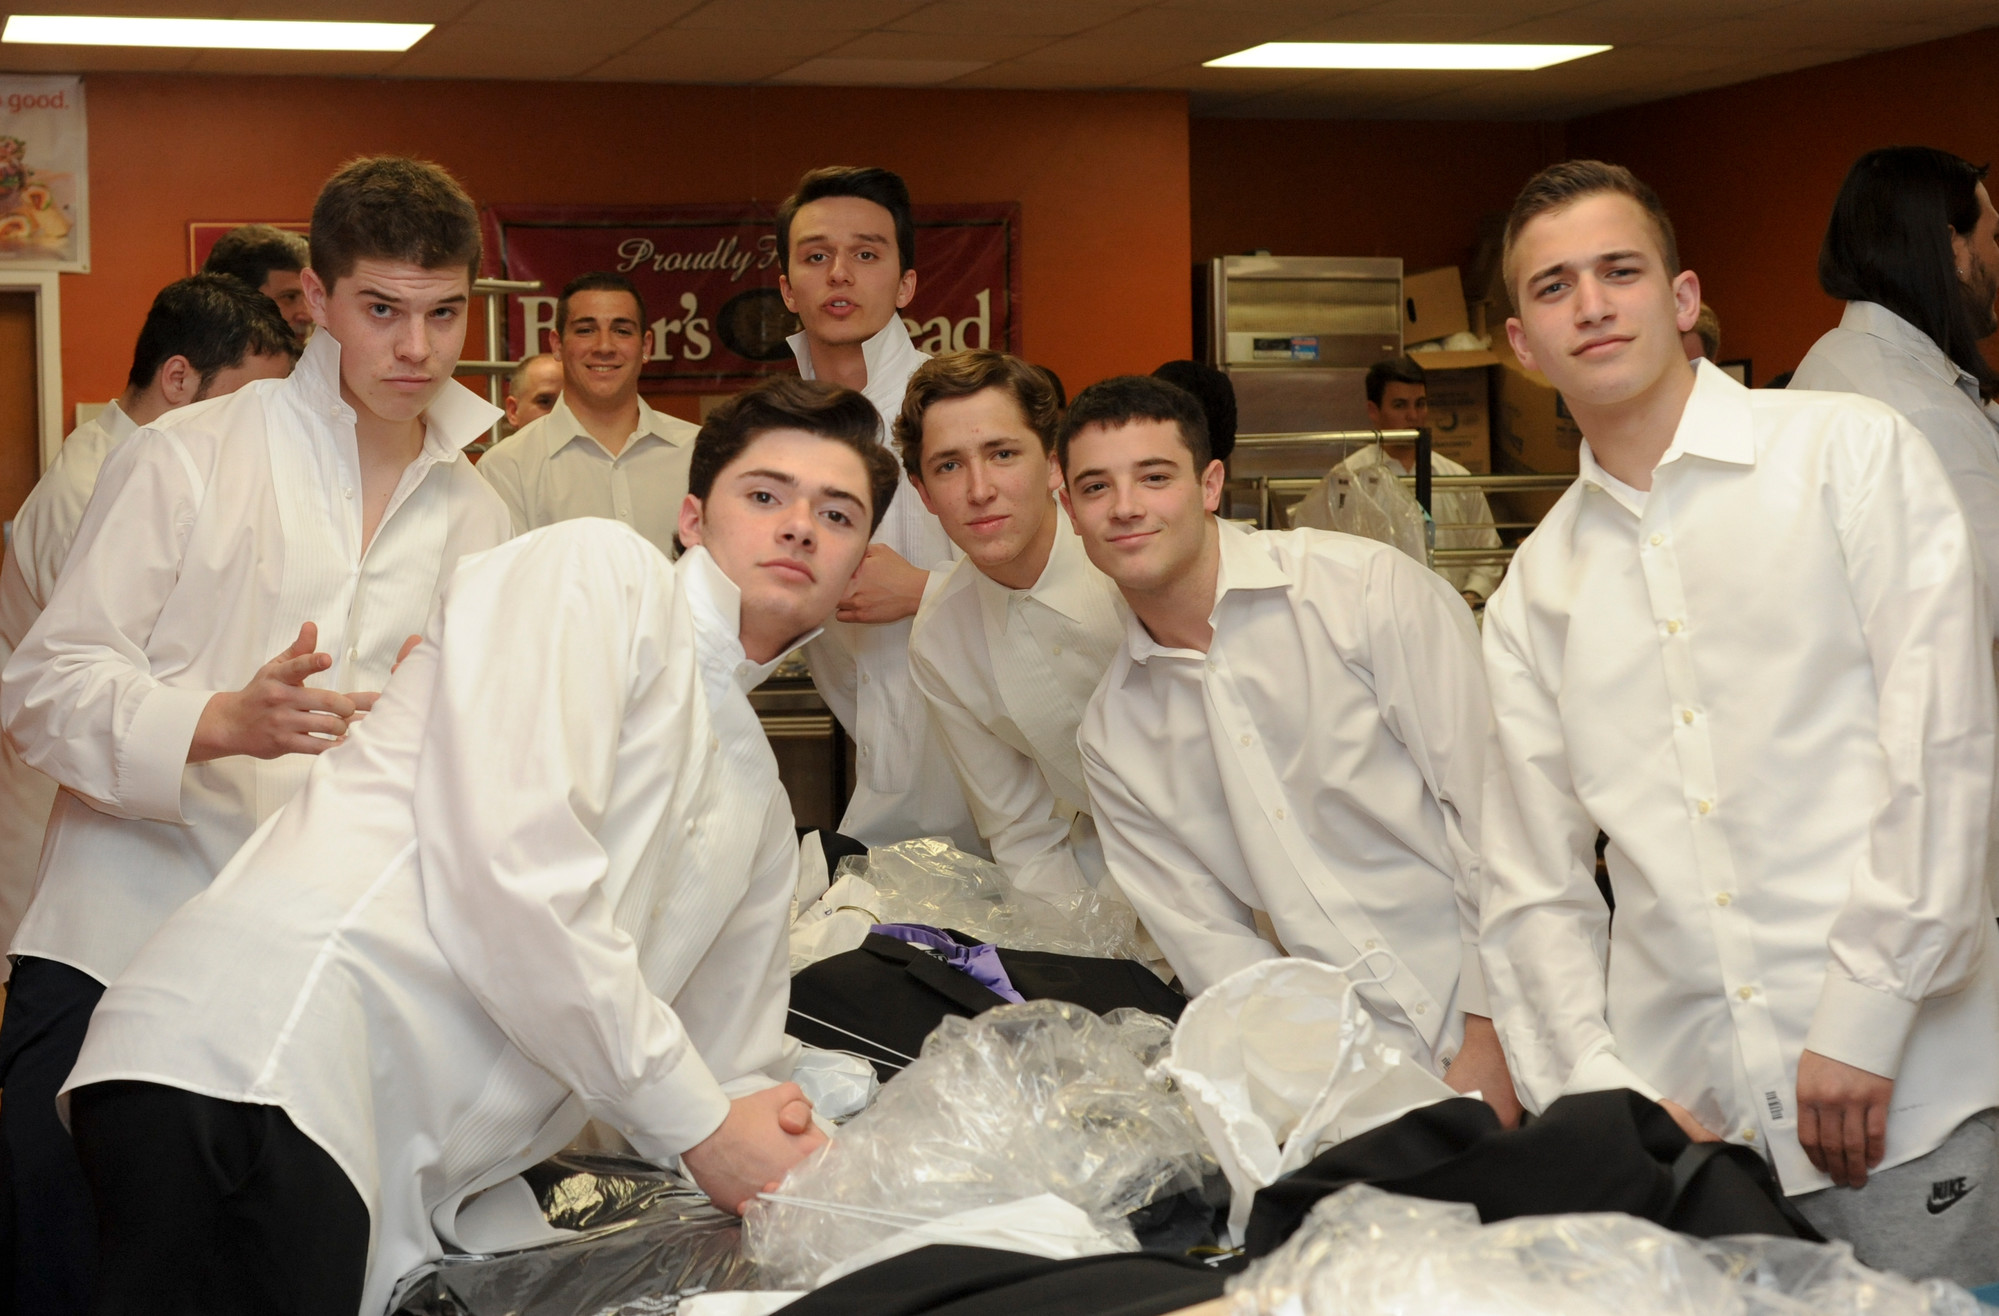 OHS The sharp dressed men: Brian DiDominica, Mike Sikas, Chris Giovinco, Alex Malavet, Tyler Lorberbaum and Alex Weber.